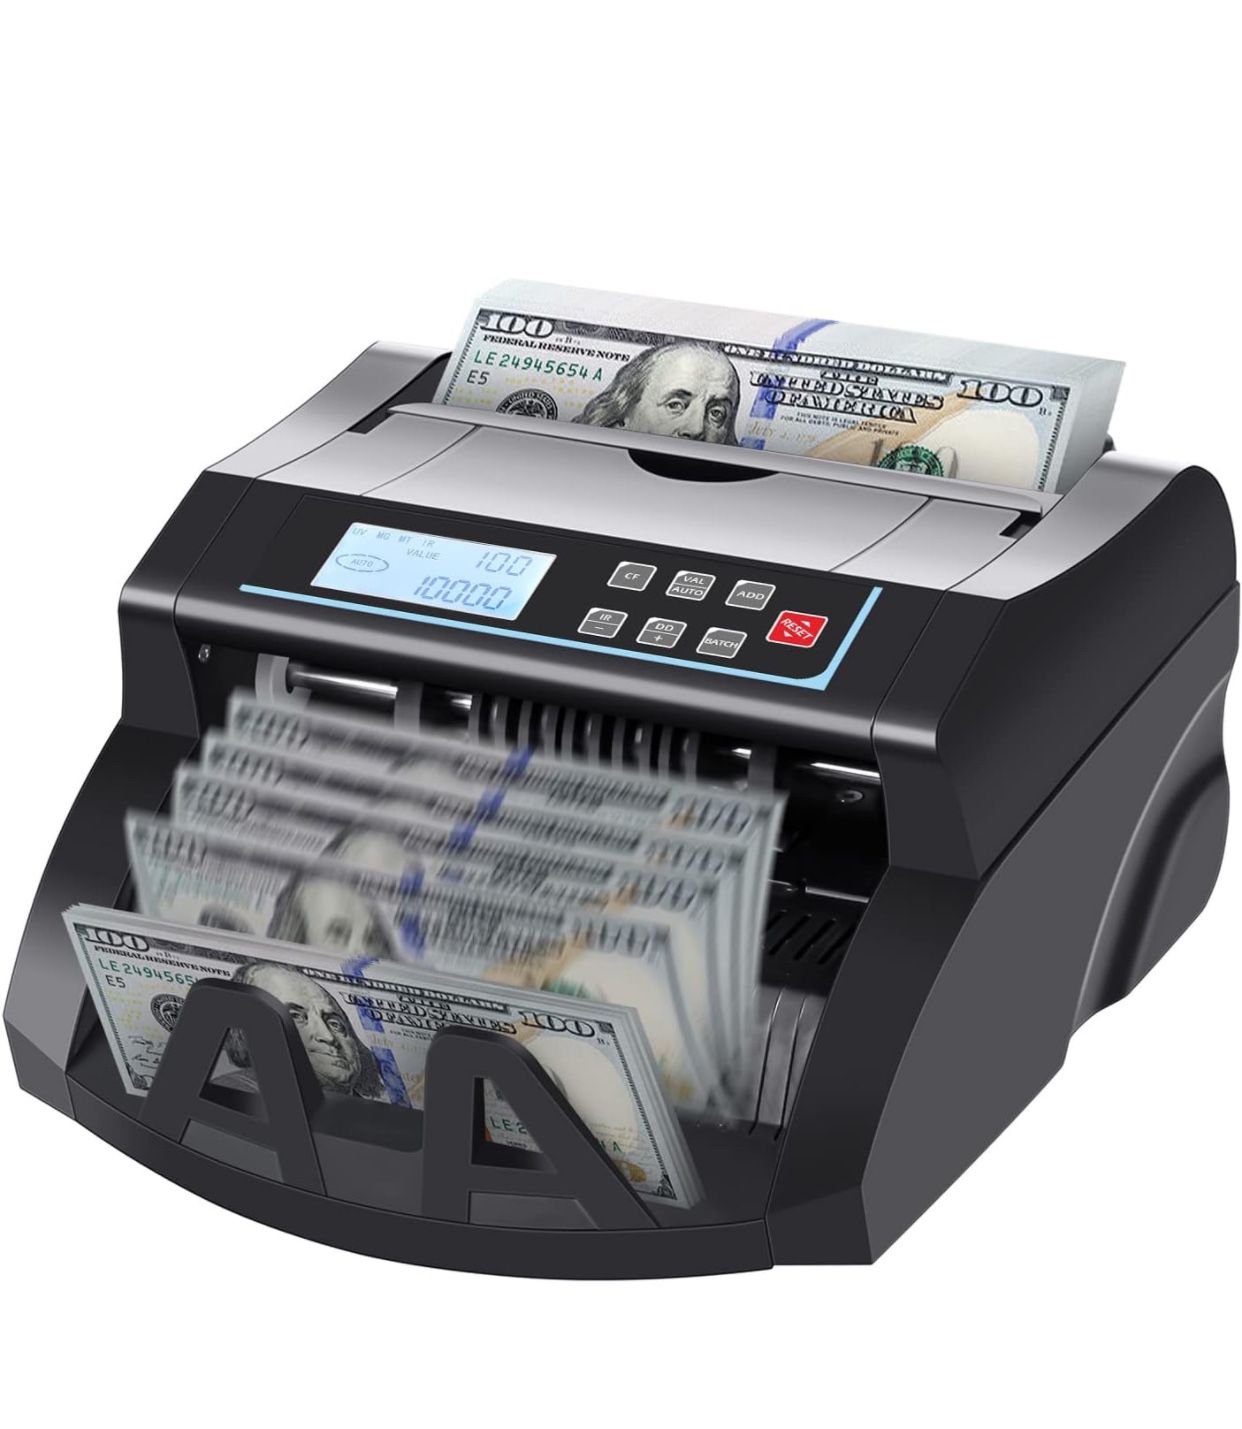 Money Counter Machine with UV/MG/MT/IR/DD Counterfeit Detection Count Value of US Dollar Bills Bill Counter, Add and Batch Modes, Cash Counting with L